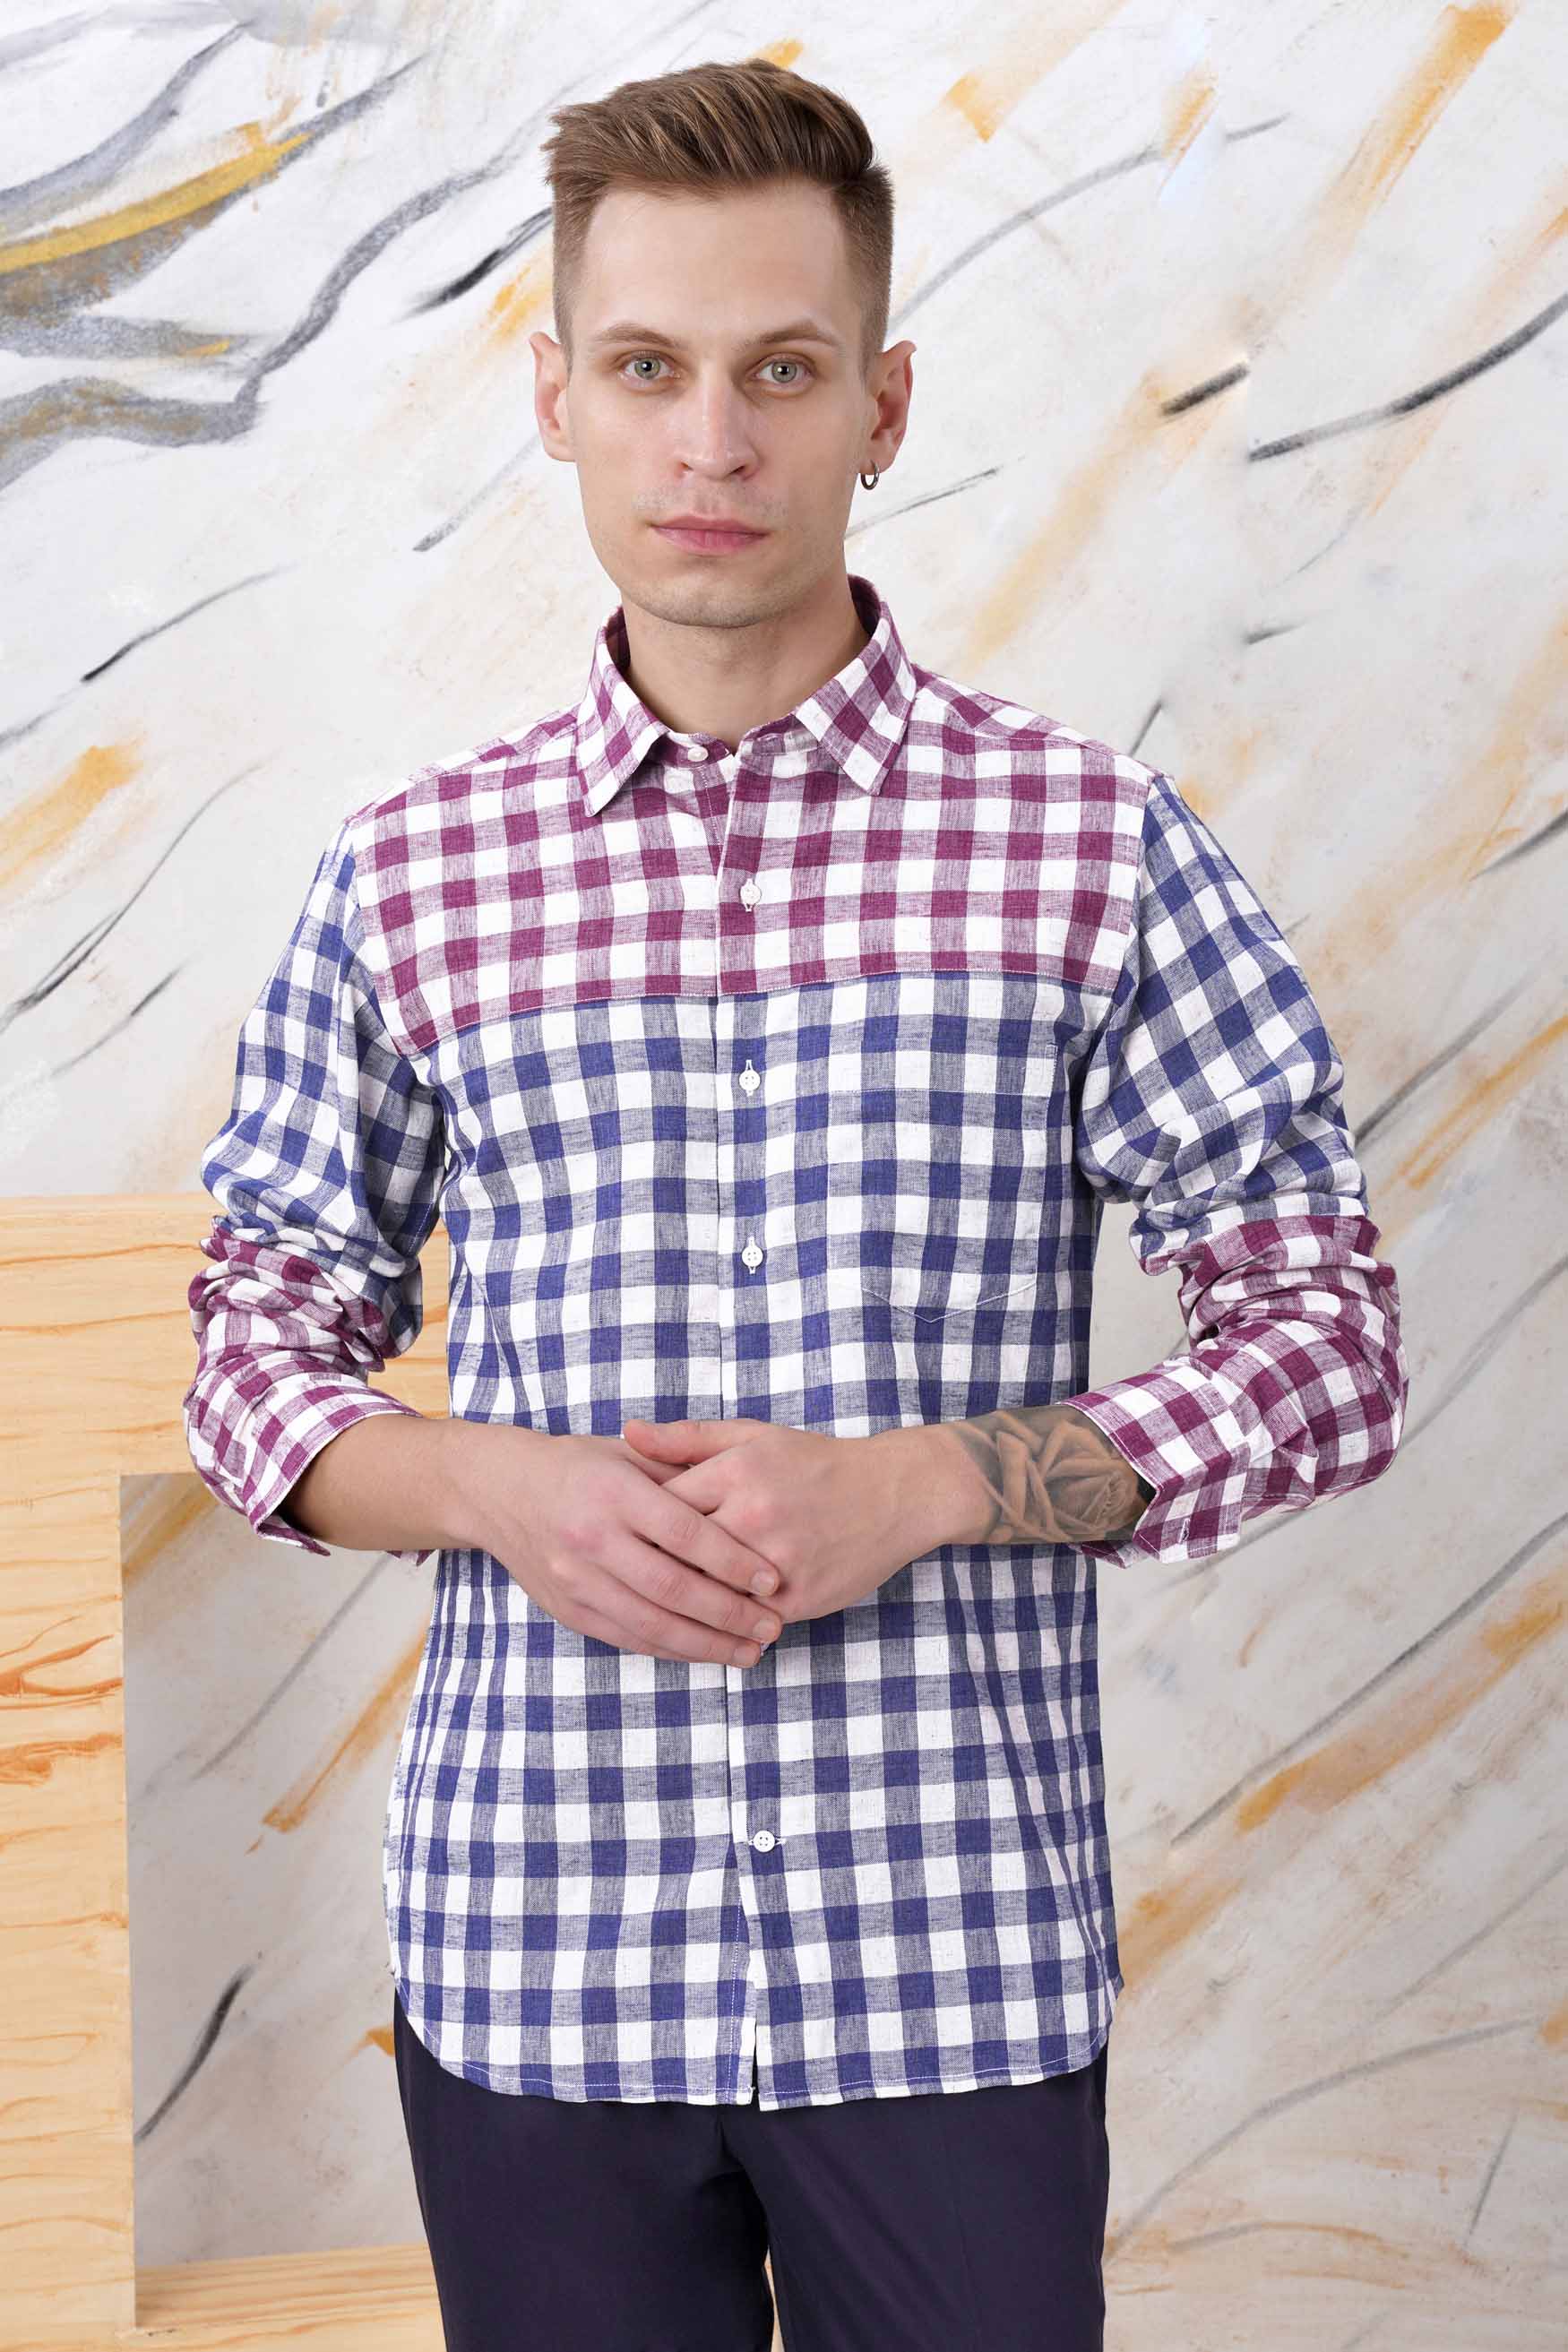 Rhino Blue with Muave Pink and White Plaid Luxurious linen Designer Shirt 11617-P575-38, 11617-P575-H-38, 11617-P575-39, 11617-P575-H-39, 11617-P575-40, 11617-P575-H-40, 11617-P575-42, 11617-P575-H-42, 11617-P575-44, 11617-P575-H-44, 11617-P575-46, 11617-P575-H-46, 11617-P575-48, 11617-P575-H-48, 11617-P575-50, 11617-P575-H-50, 11617-P575-52, 11617-P575-H-52